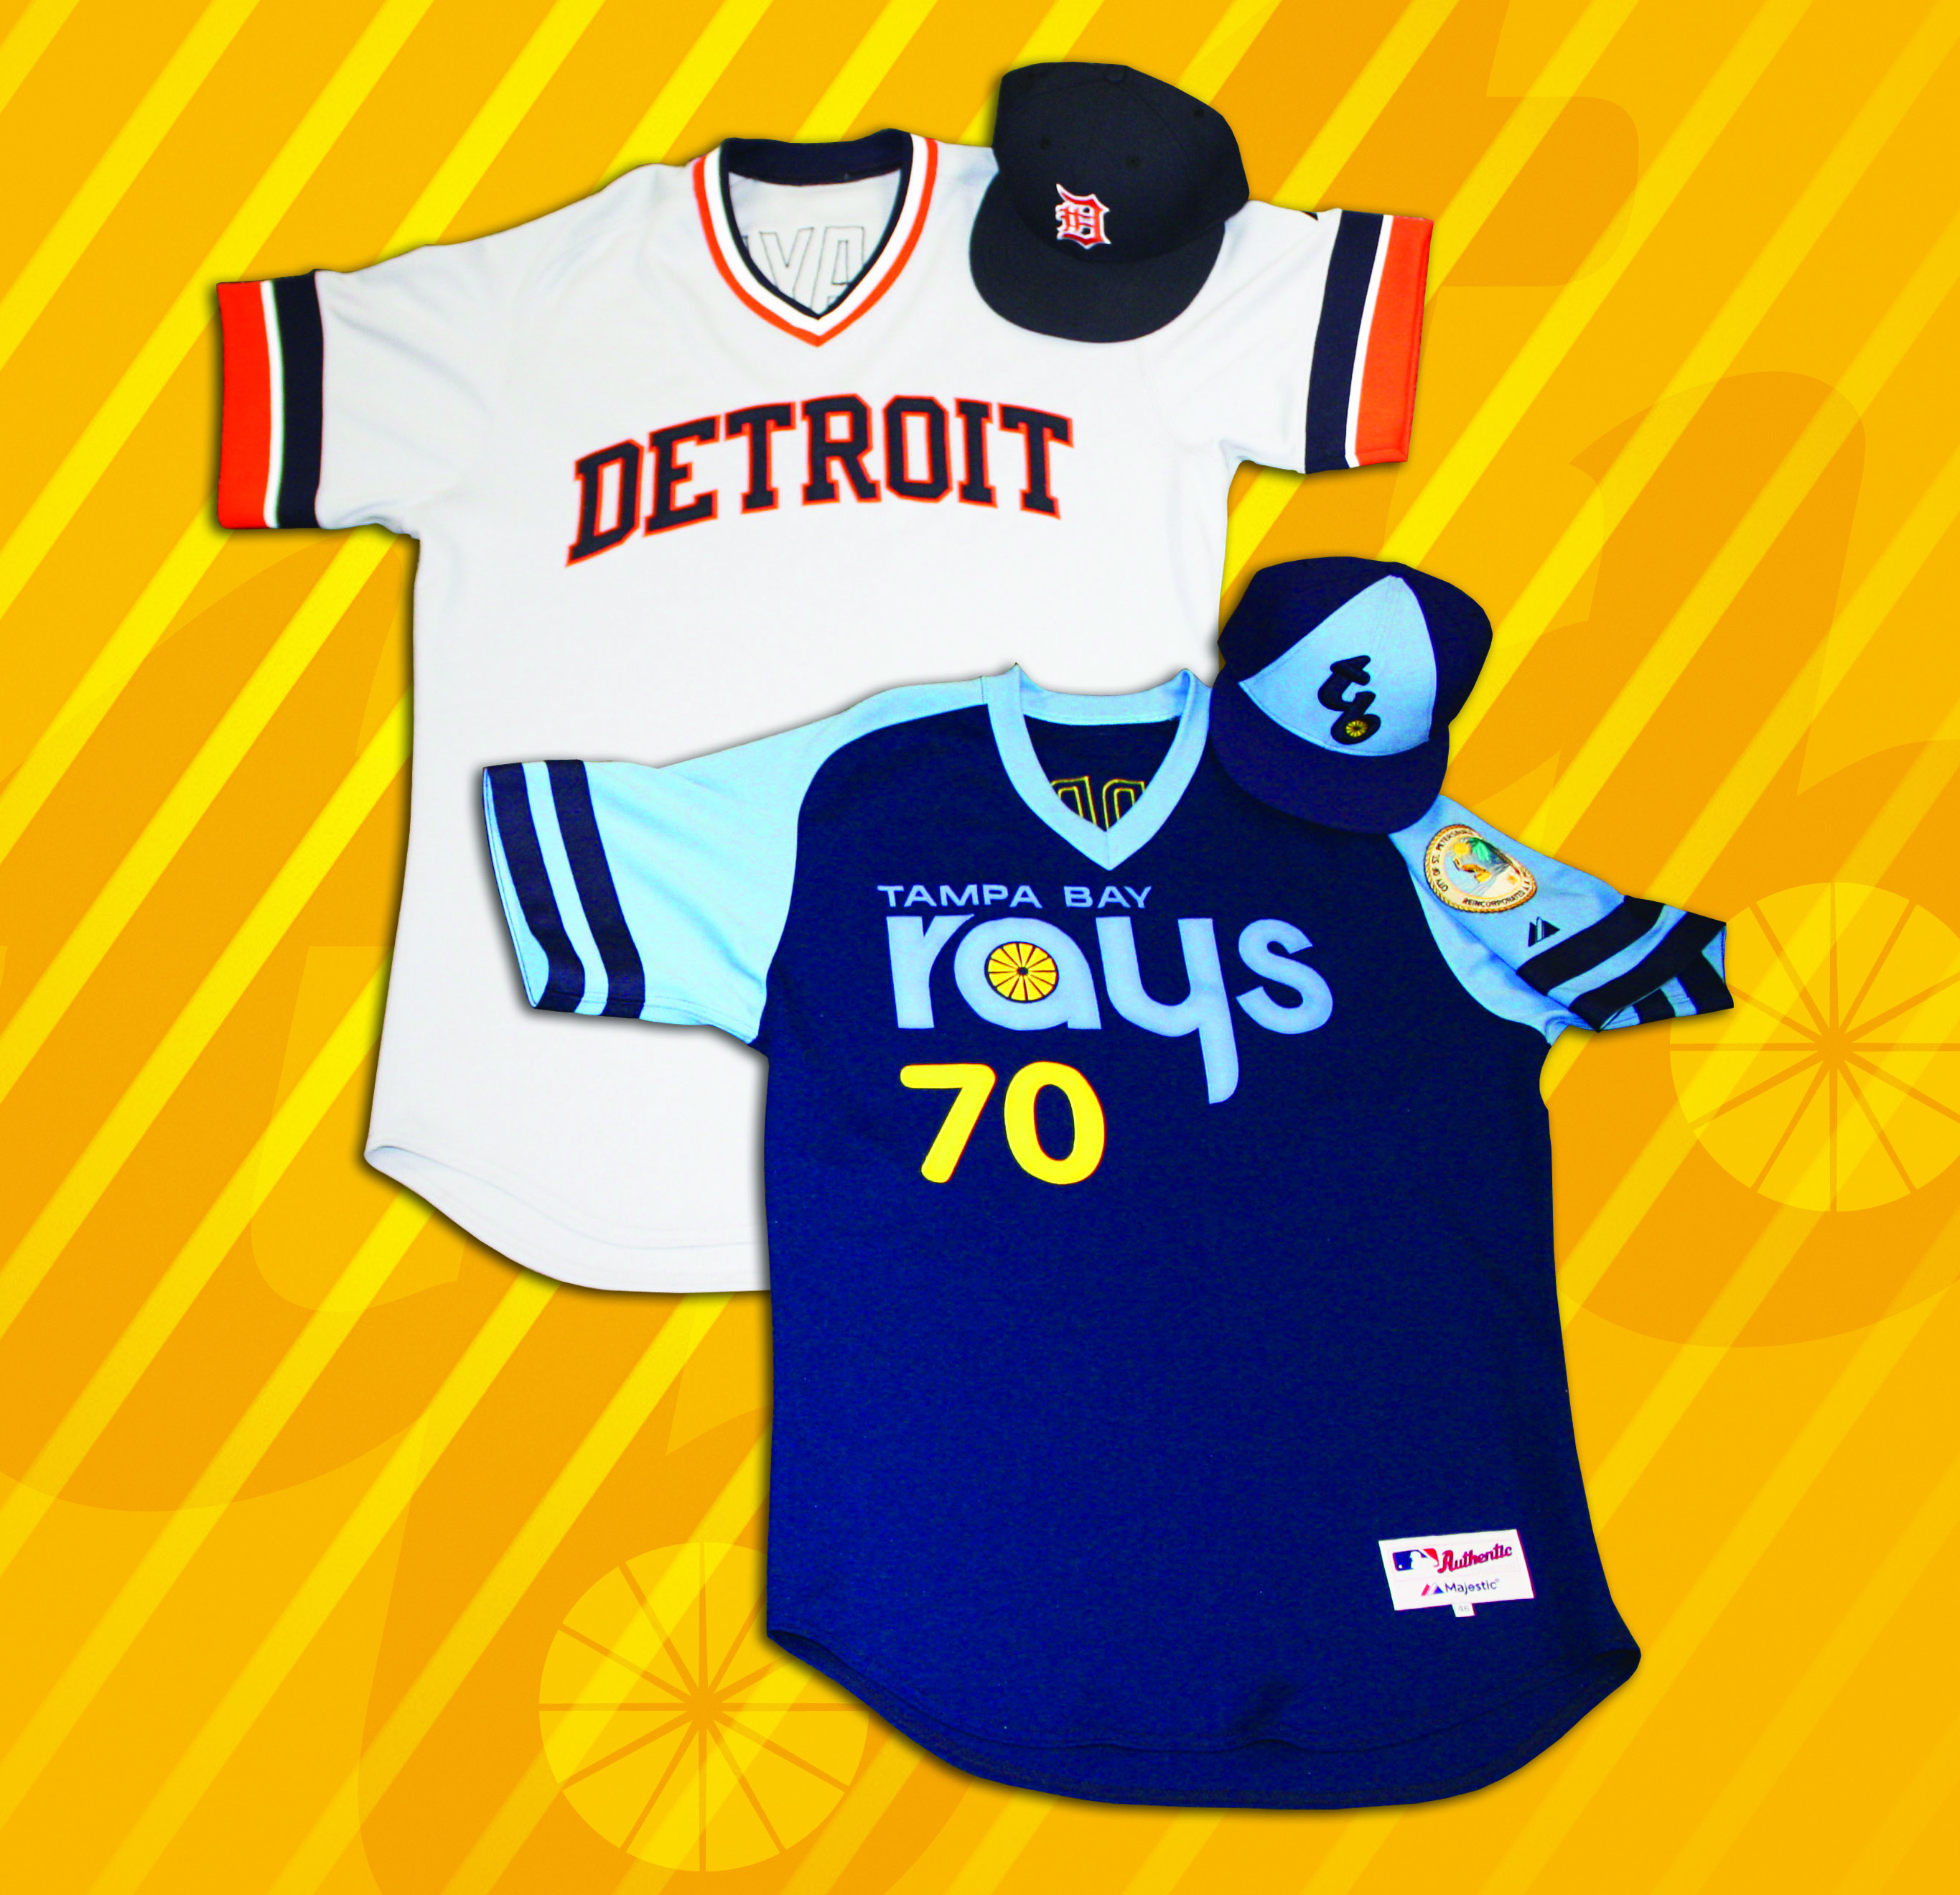 The Rays, formed in 1998, wear 'fauxback' uniforms from 1979